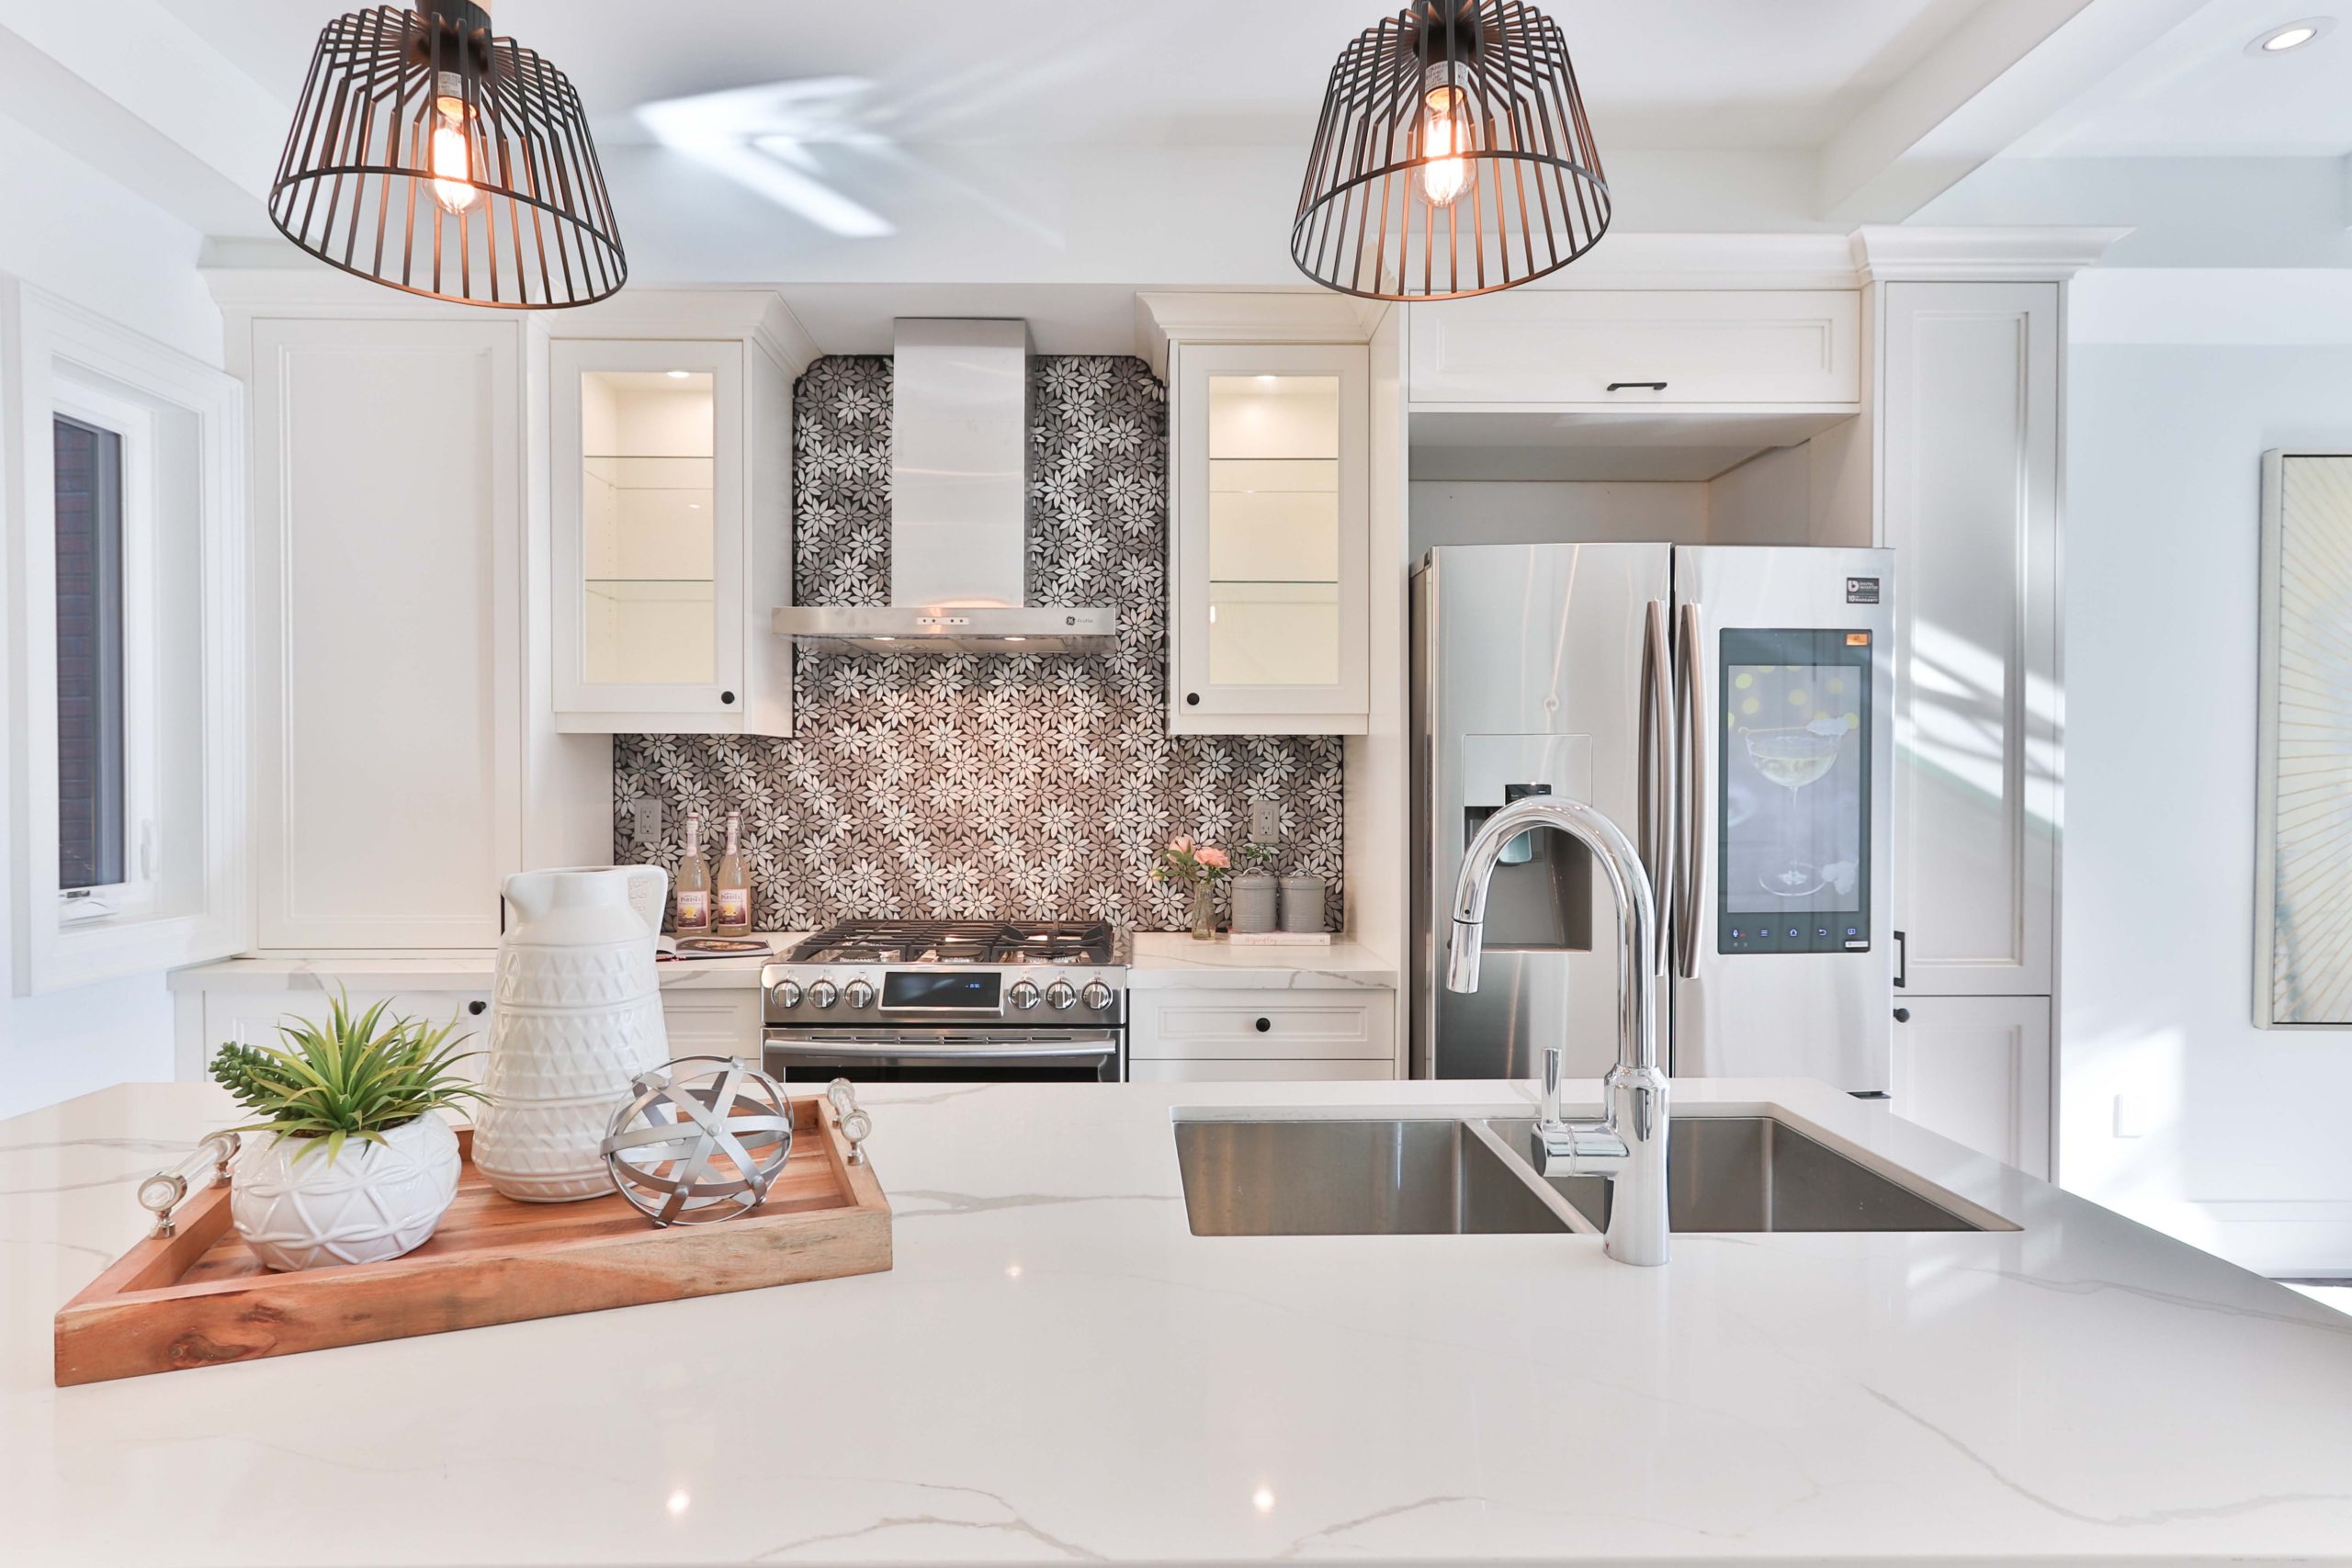 beautiful kitchen lighting by the dirt connections remodeling team